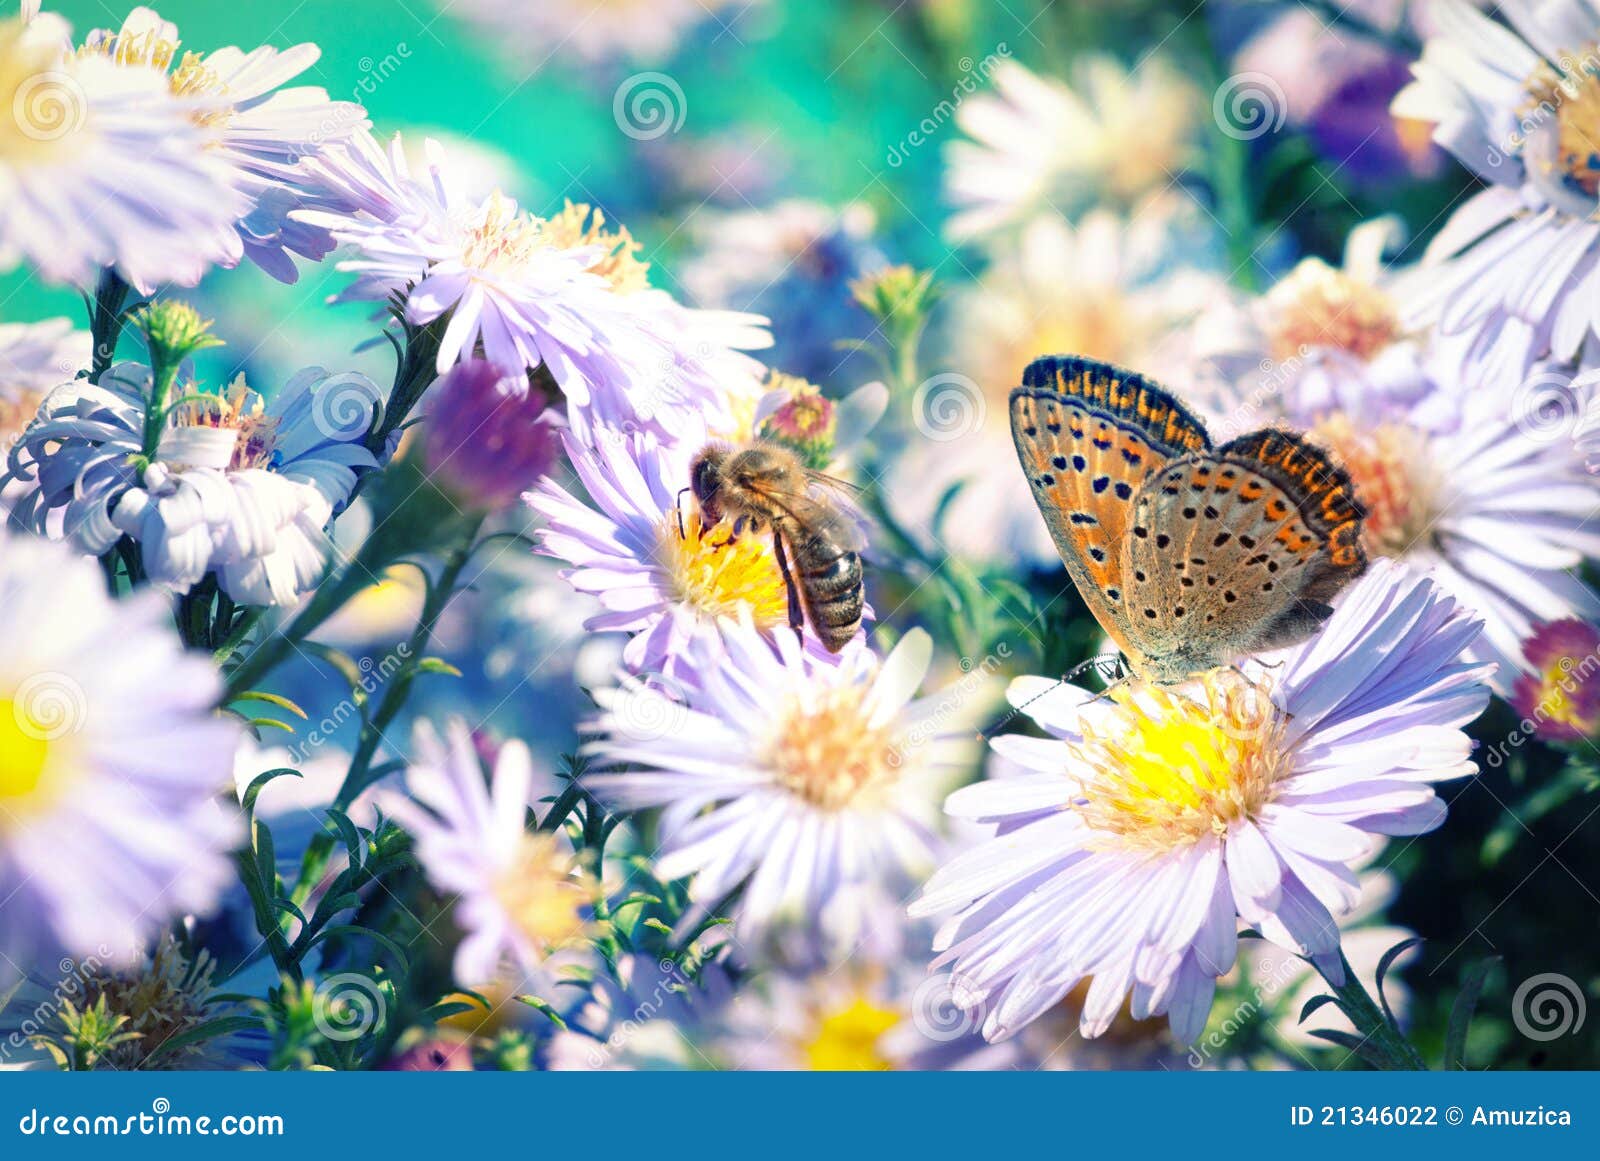 Bee And Butterfly On Flowers Stock Photography Image 21346022